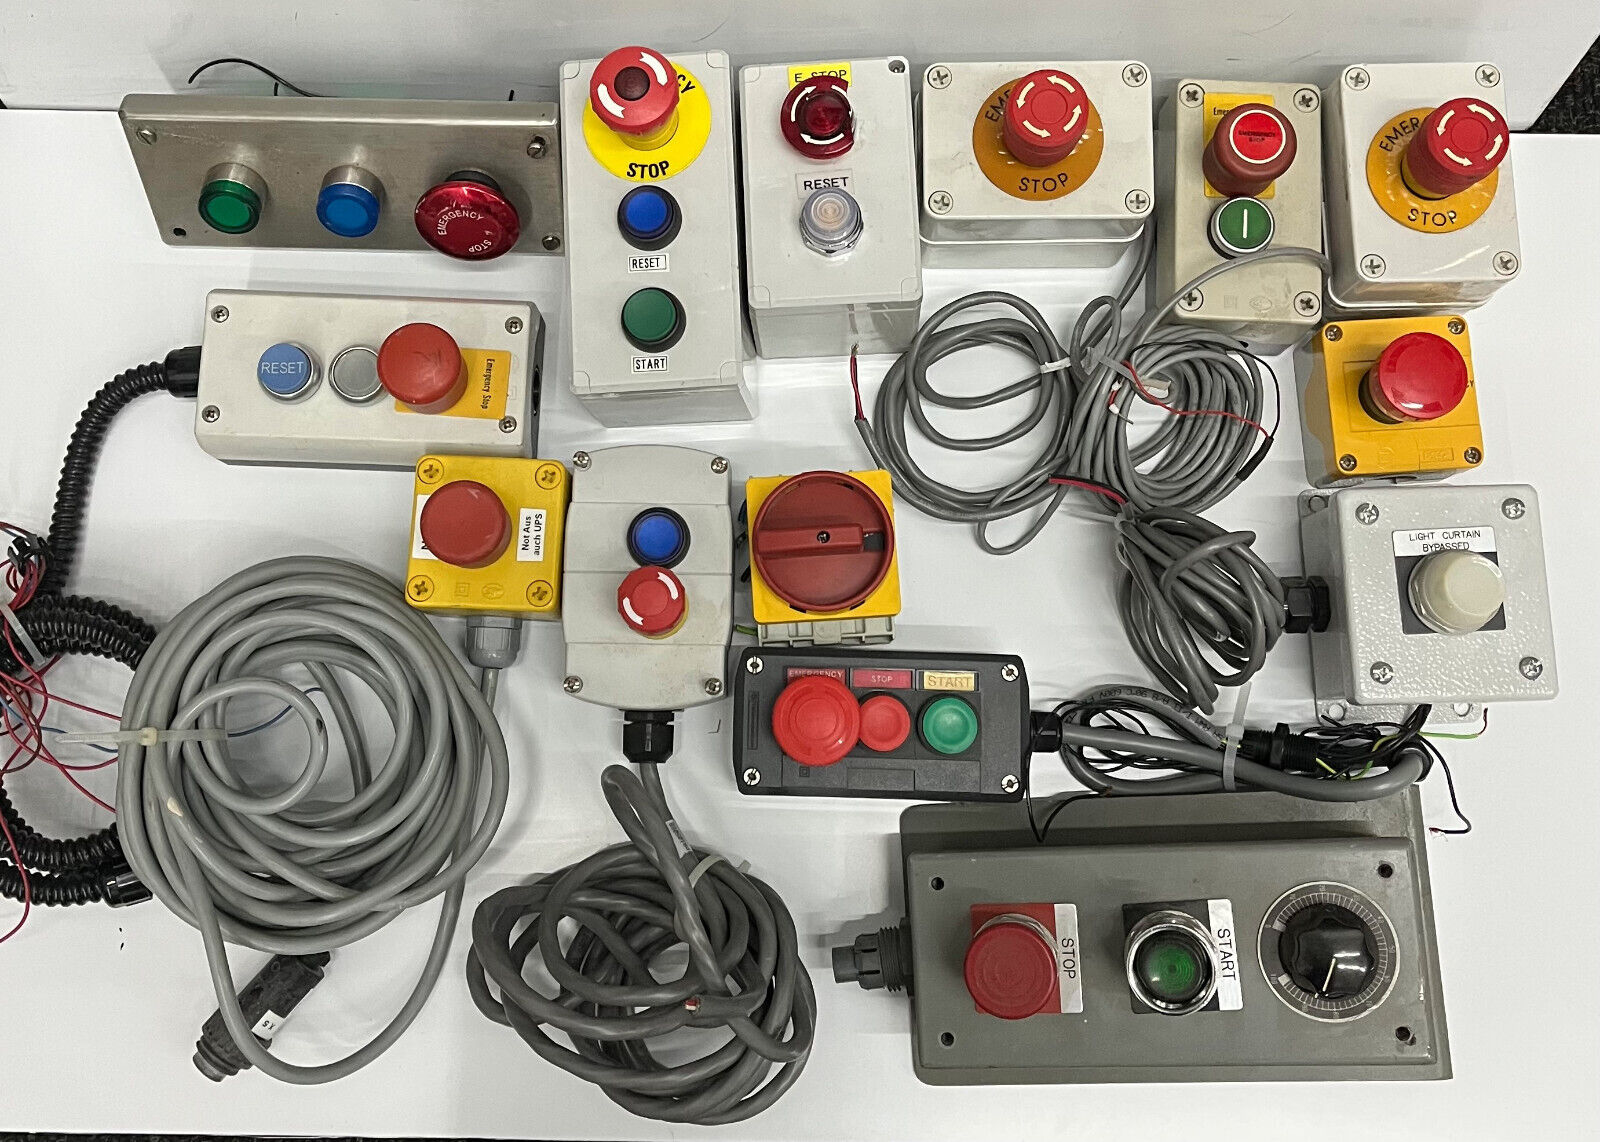 MISCELLANEOUS PUSH BUTTON SWITCHES CONTROL STATION BOXES - 1 LOT OF QTY 14 Unbranded